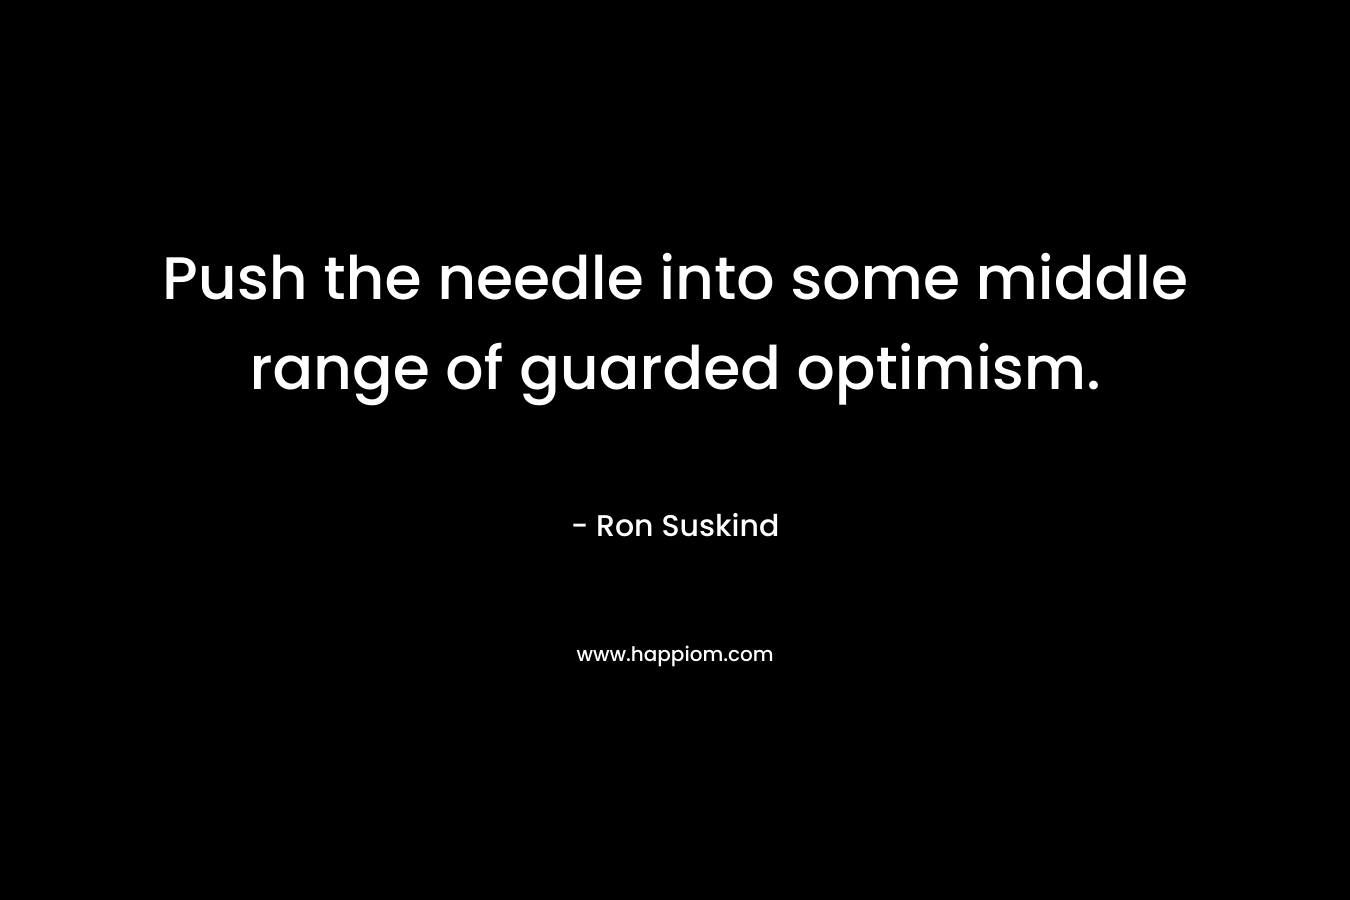 Push the needle into some middle range of guarded optimism.